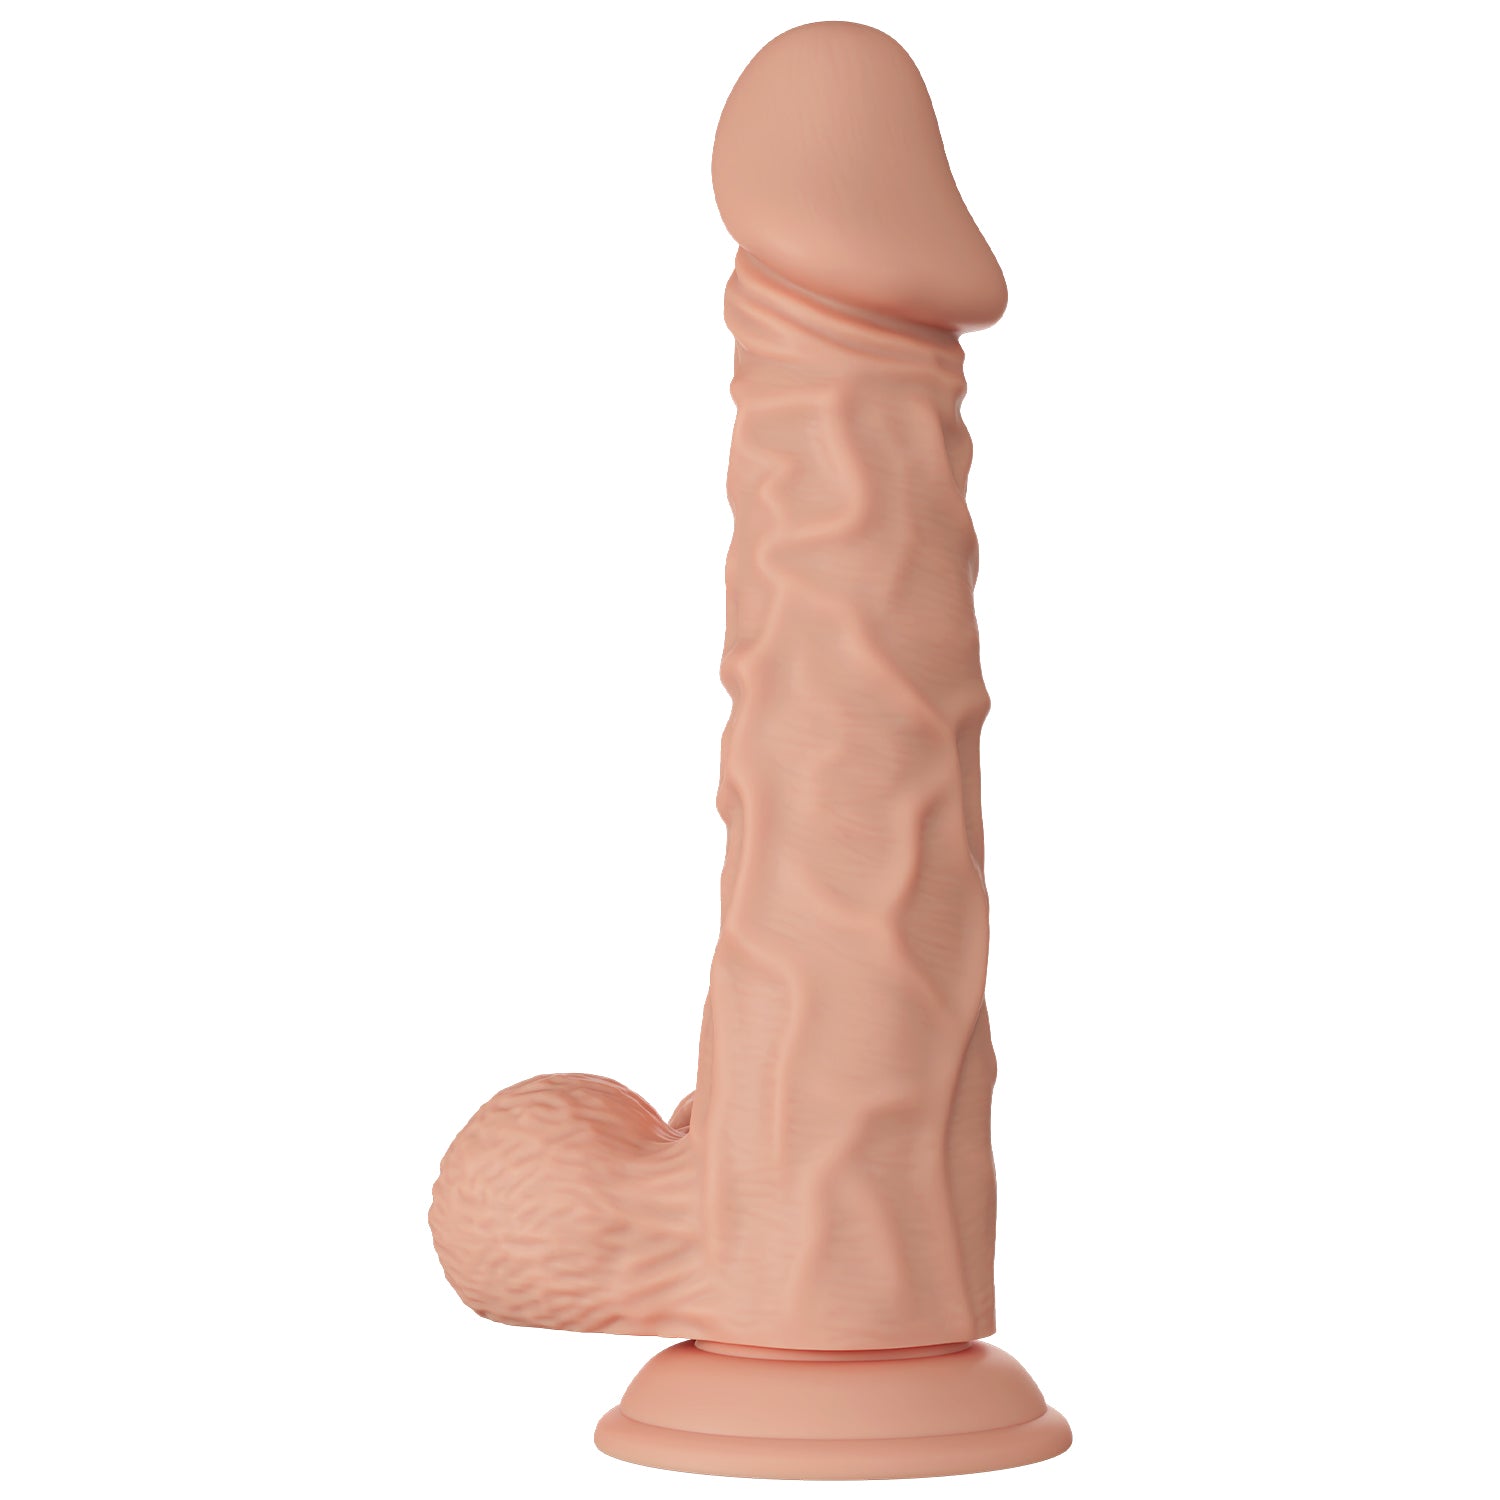 Baile 9.4 Inch Lifelike Dildo With Suction Cup In Flesh